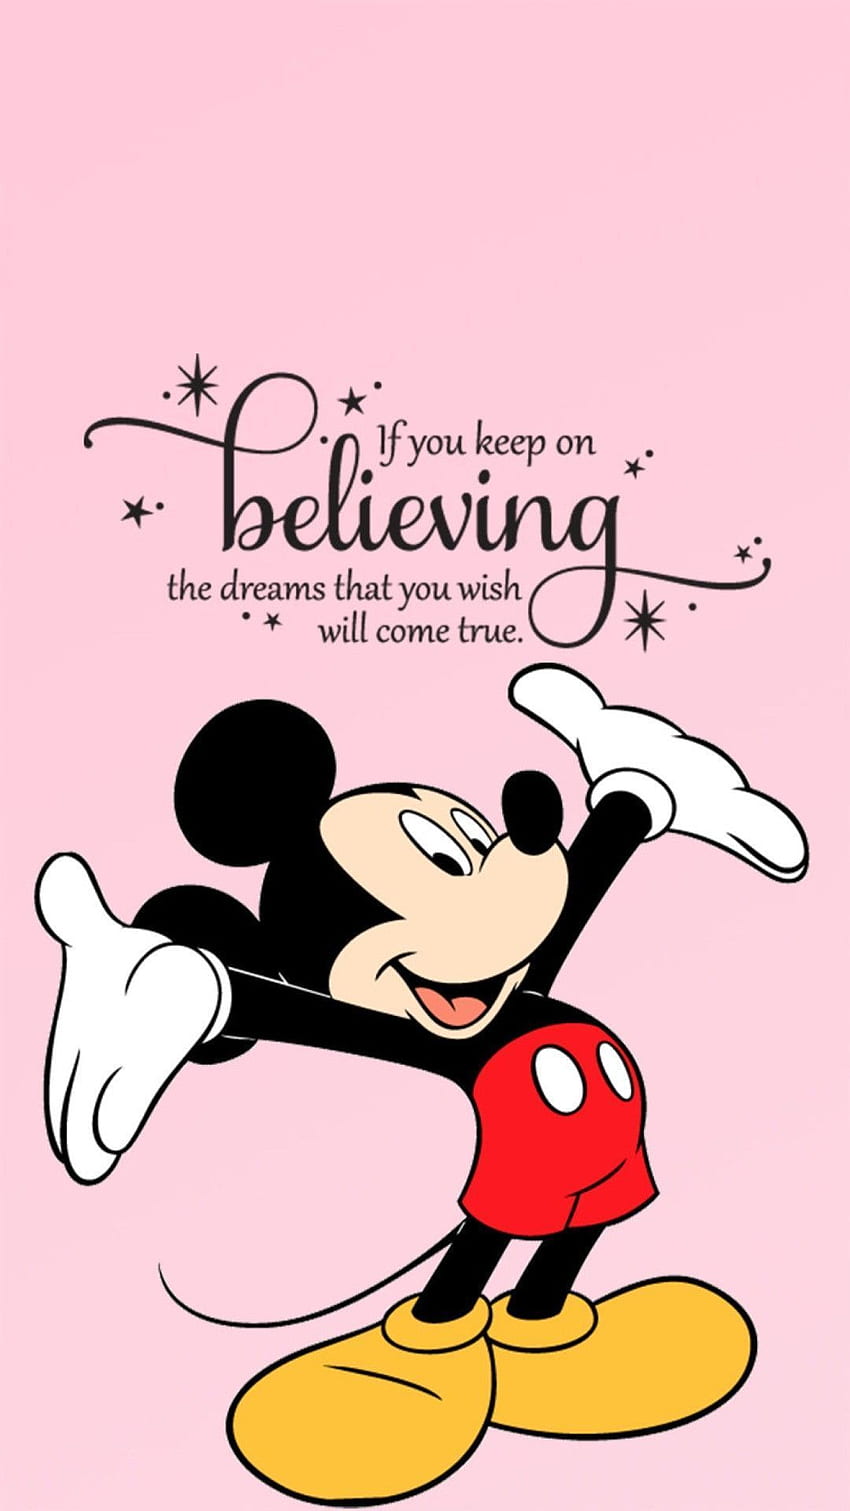 iPhone from Uploaded by user. Disney characters mickey mouse, Mickey mouse quotes, Walt disney quotes, Cute Disney Characters HD phone wallpaper